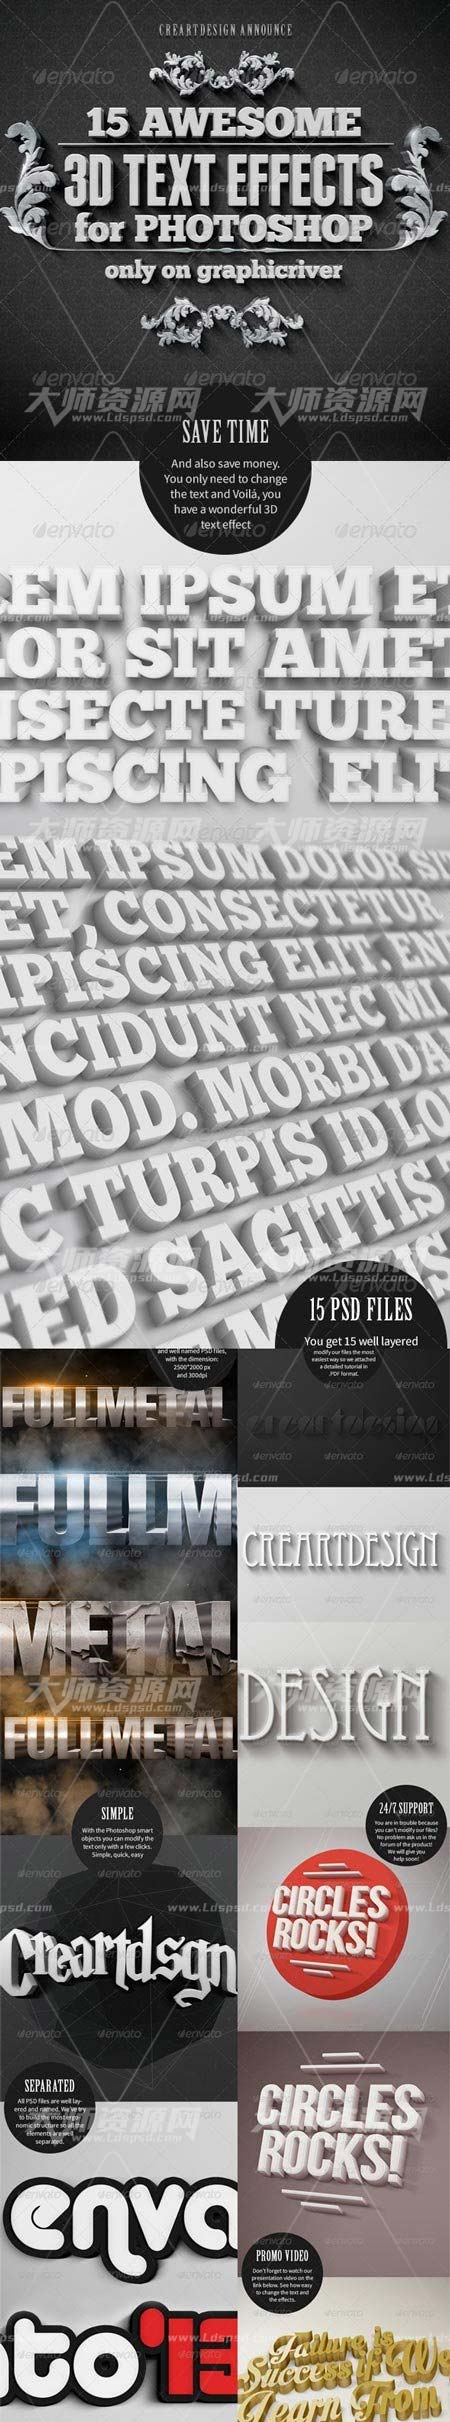 15 Various 3D Text Effects - Pack,15个不同效果的3D文本模板